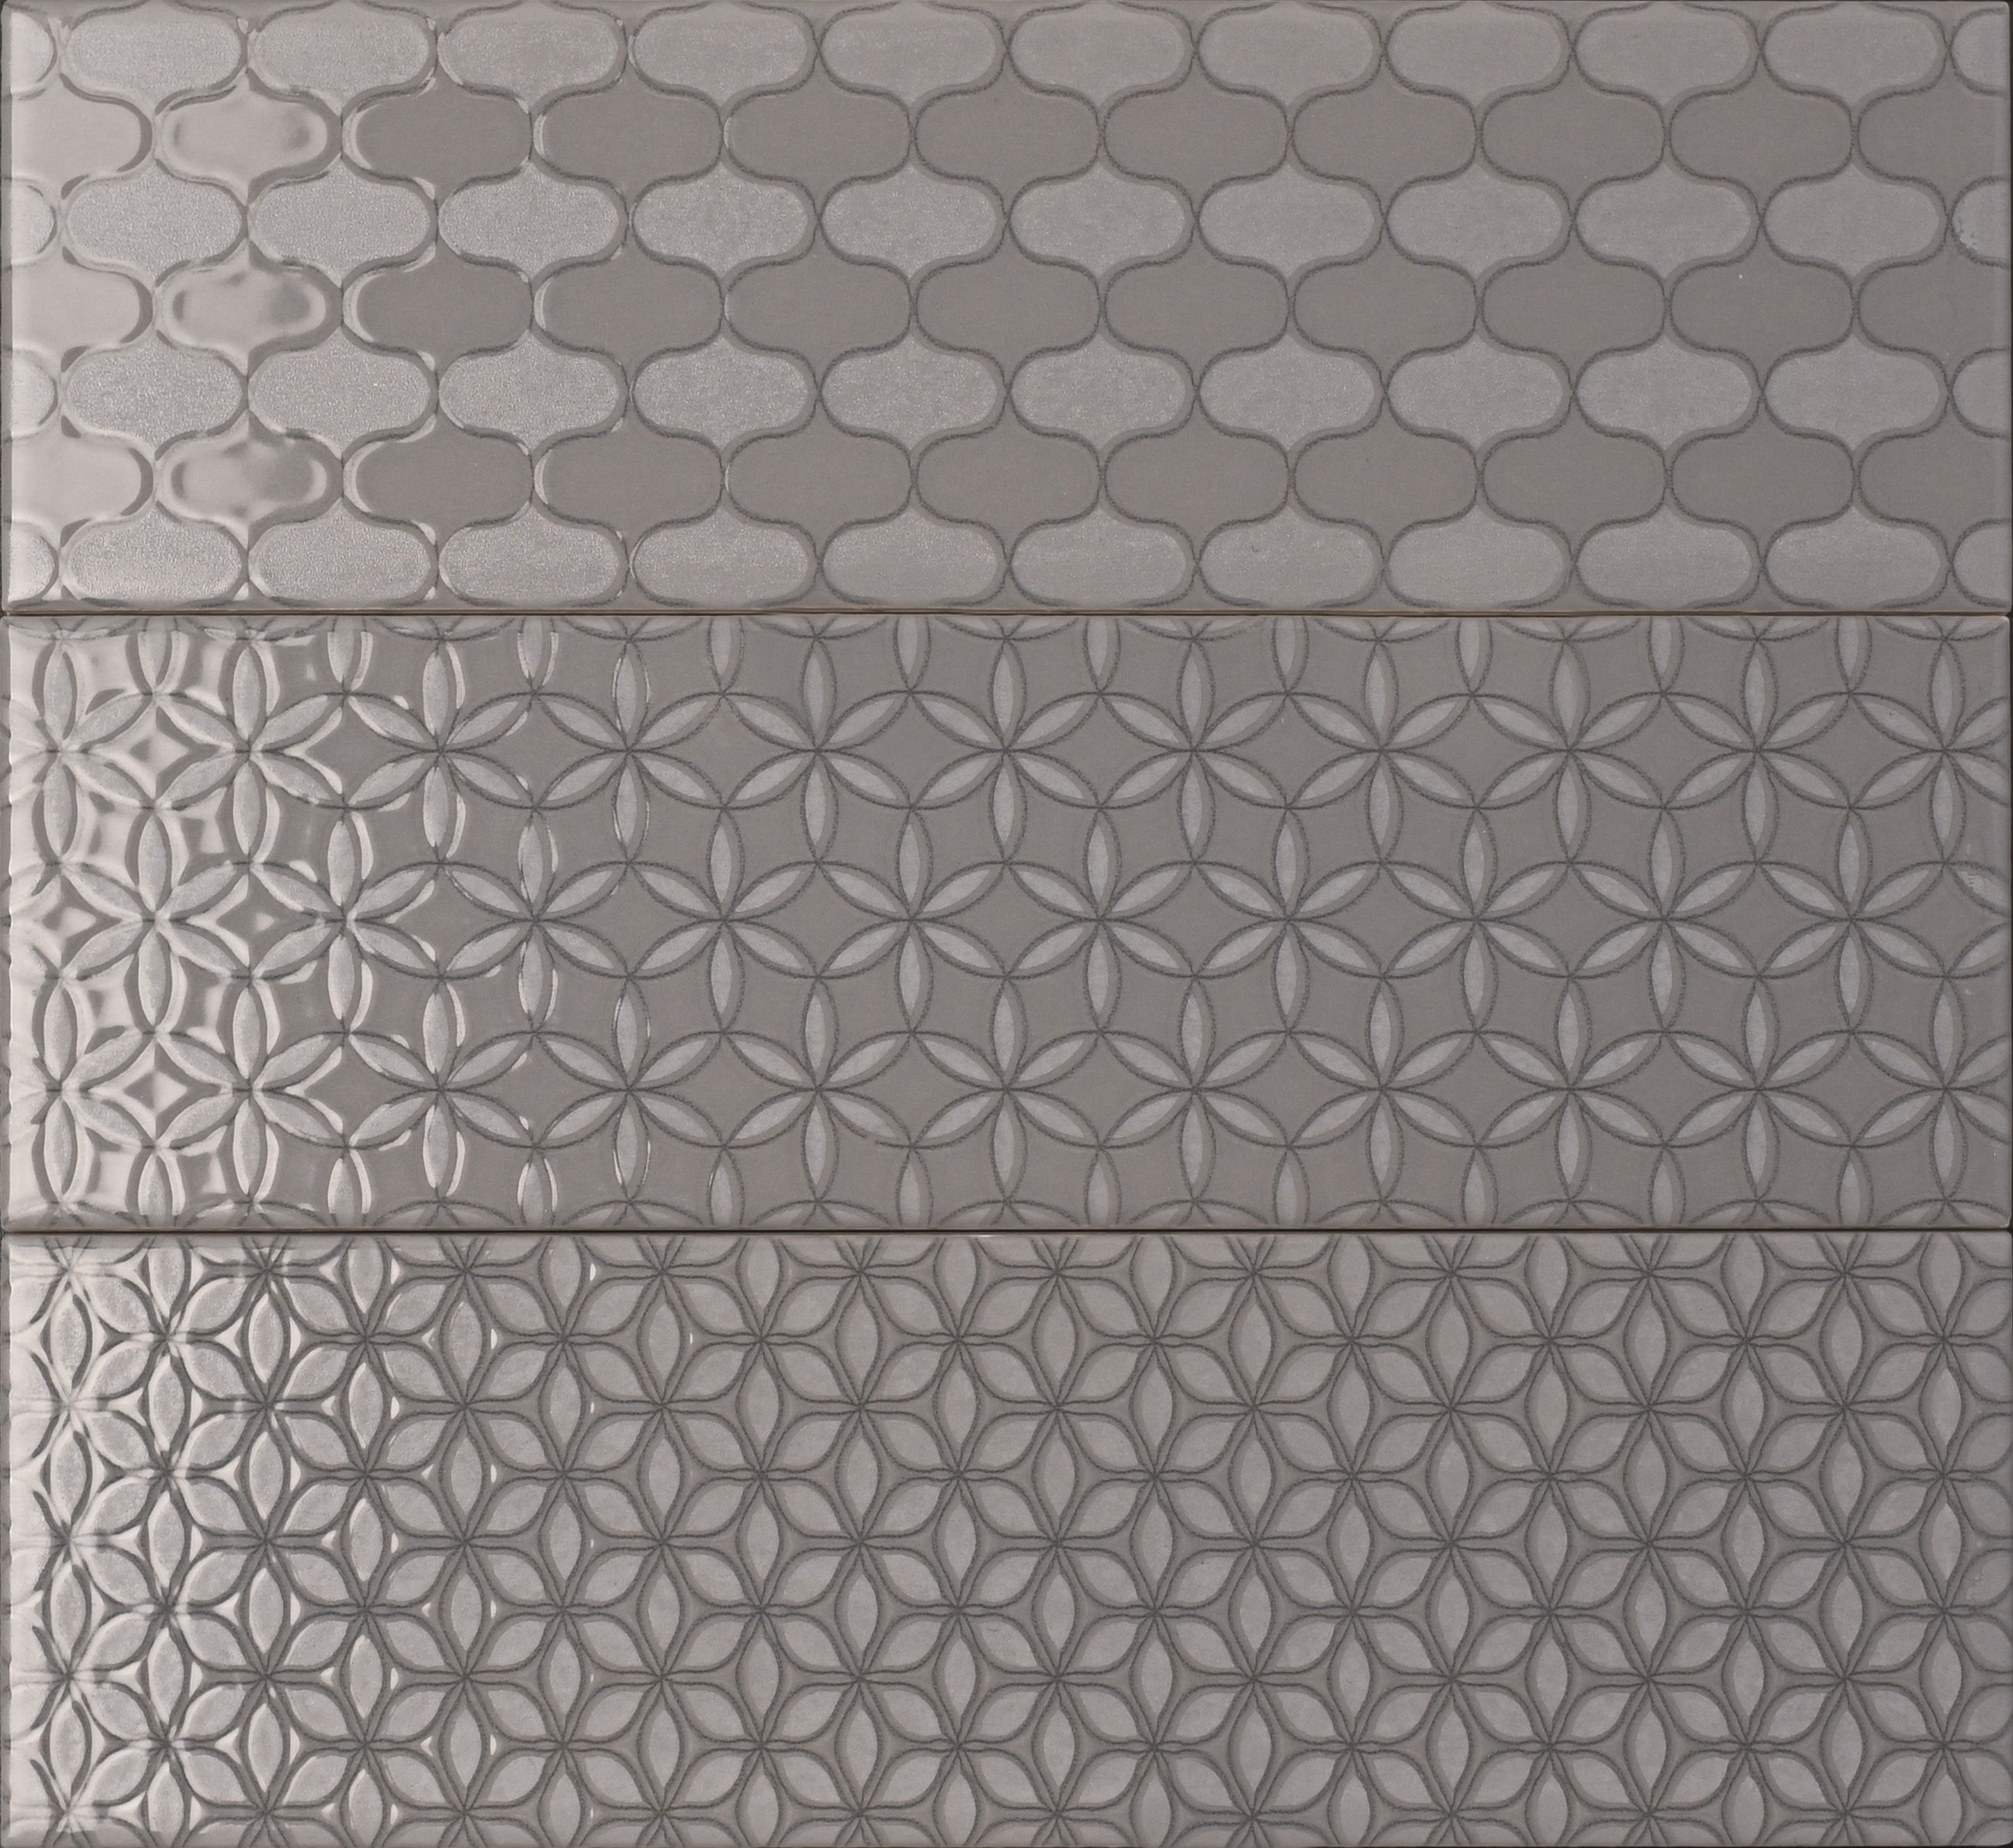 Tangier Grey Gloss Patterned Ceramic Wall Tile, Pack of 54, (L)245mm (W)75mm